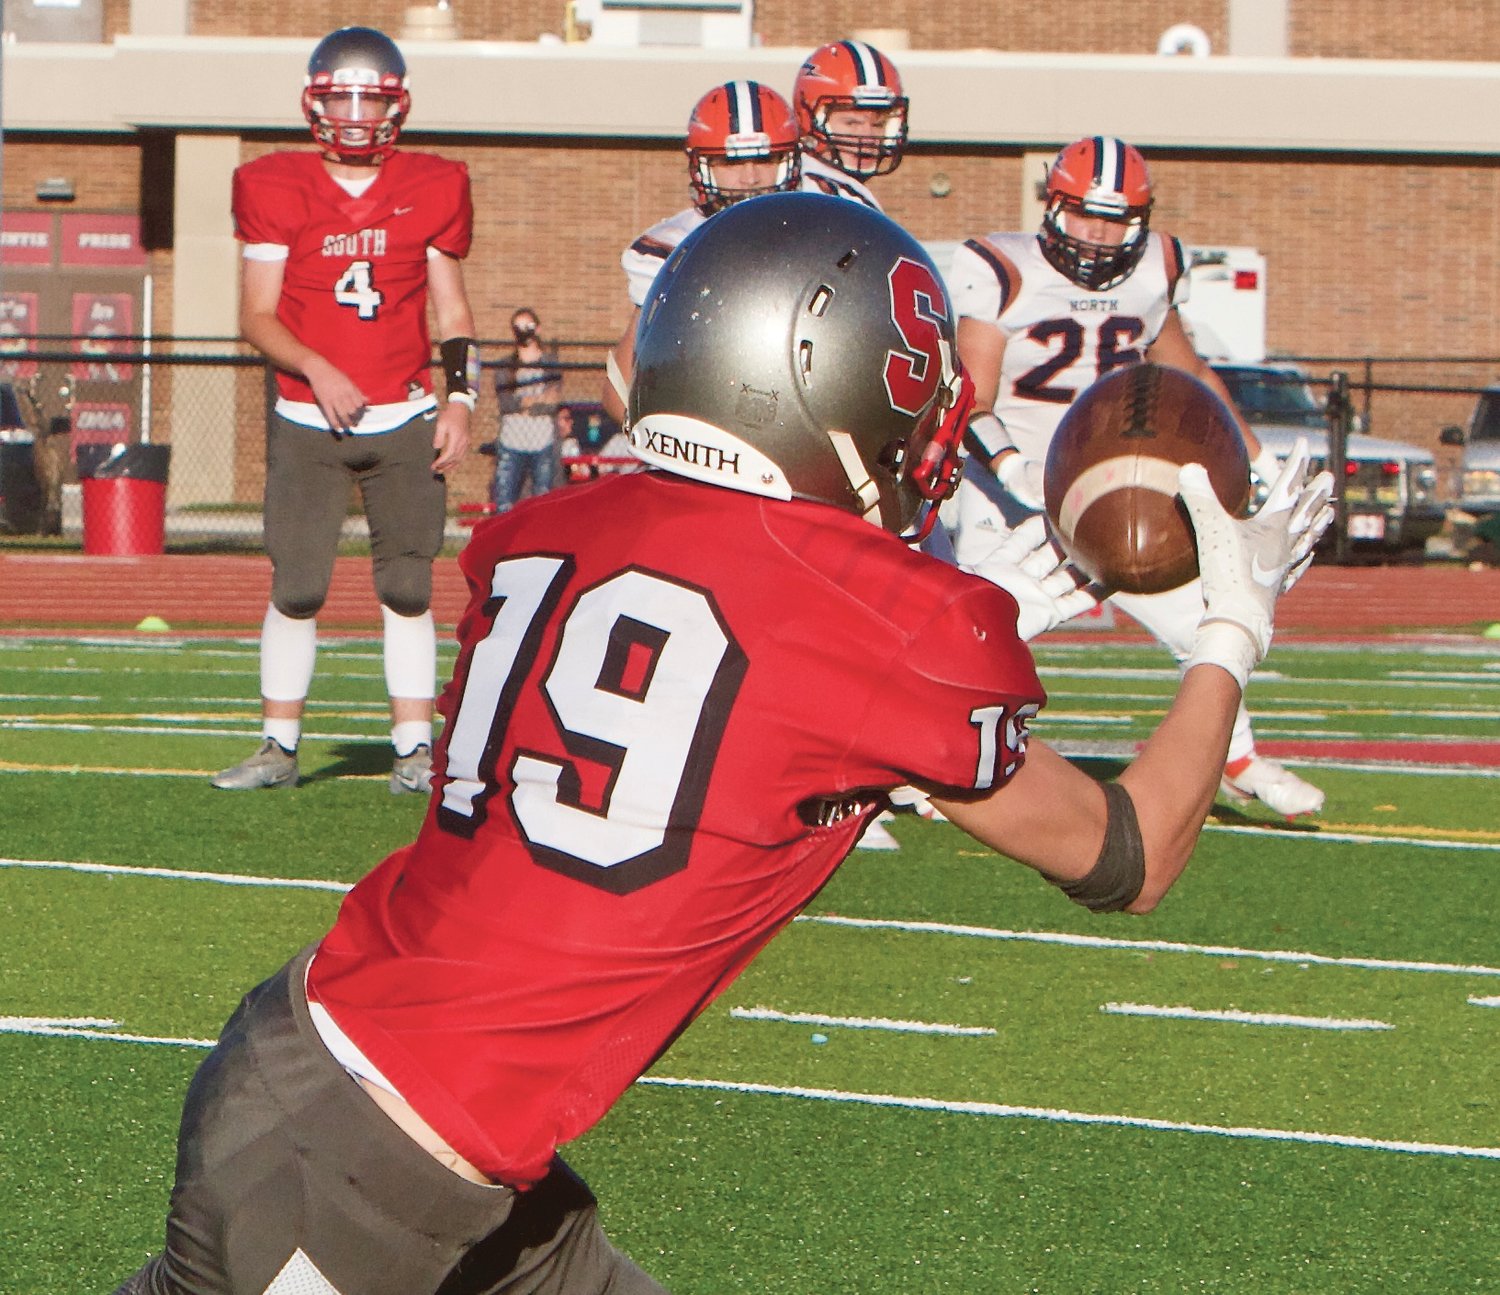 Southmont's Cale Hess snags a pass from Nick Scott in the Mounties' 28-6 loss to North Montgomery.